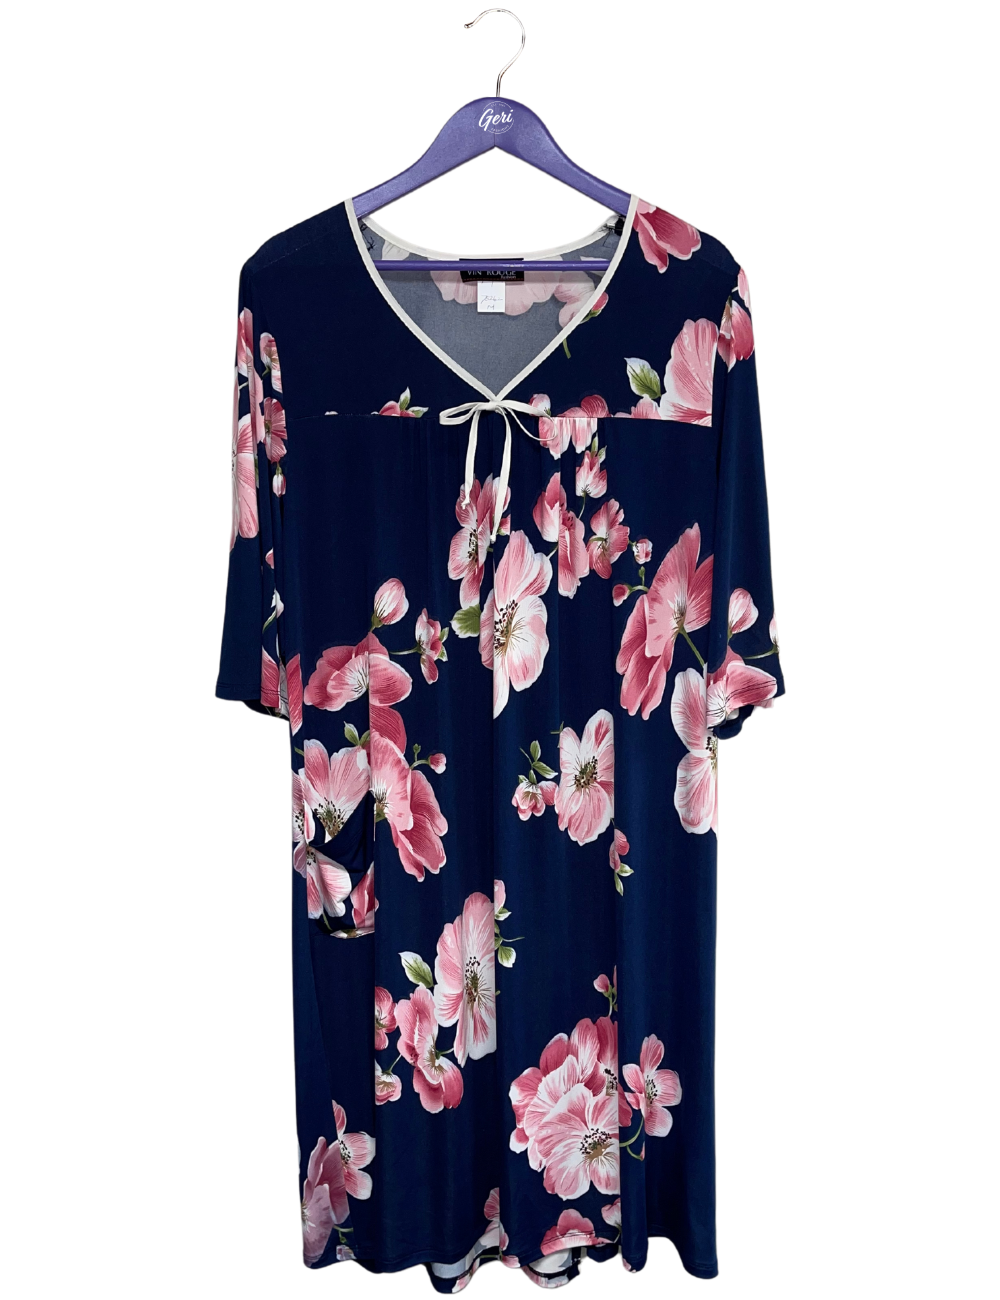 Betty Adaptive Nightgown - Navy & Pink Floral